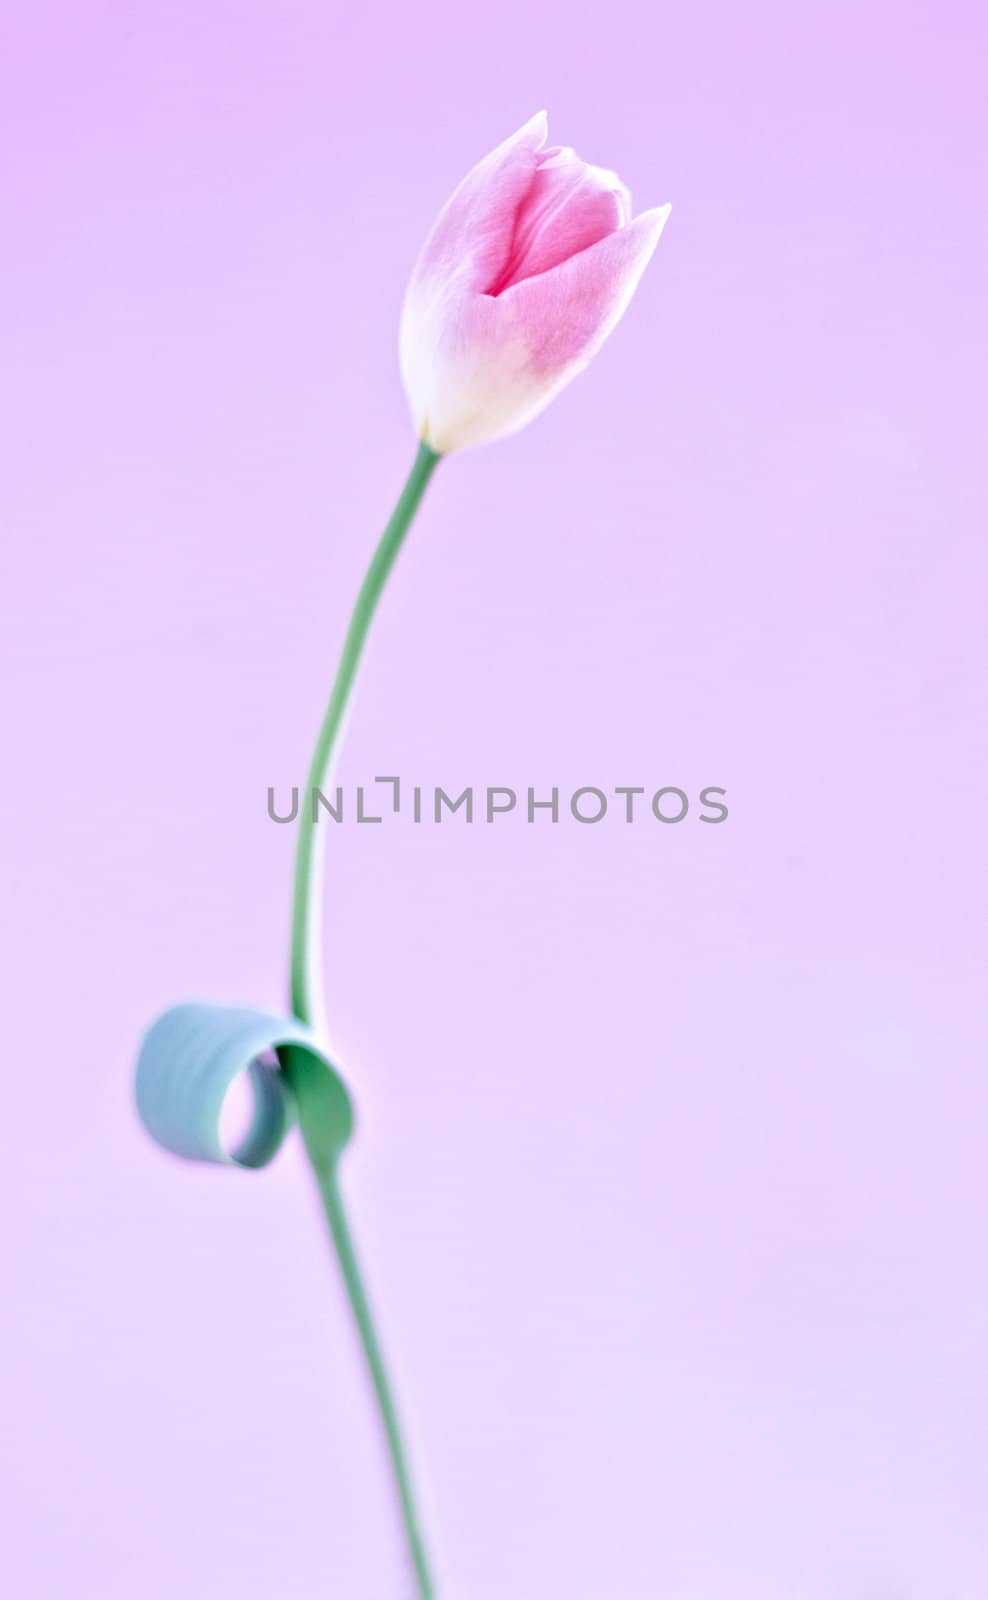 Flower pink orchid - phalaenopsis isolated over white